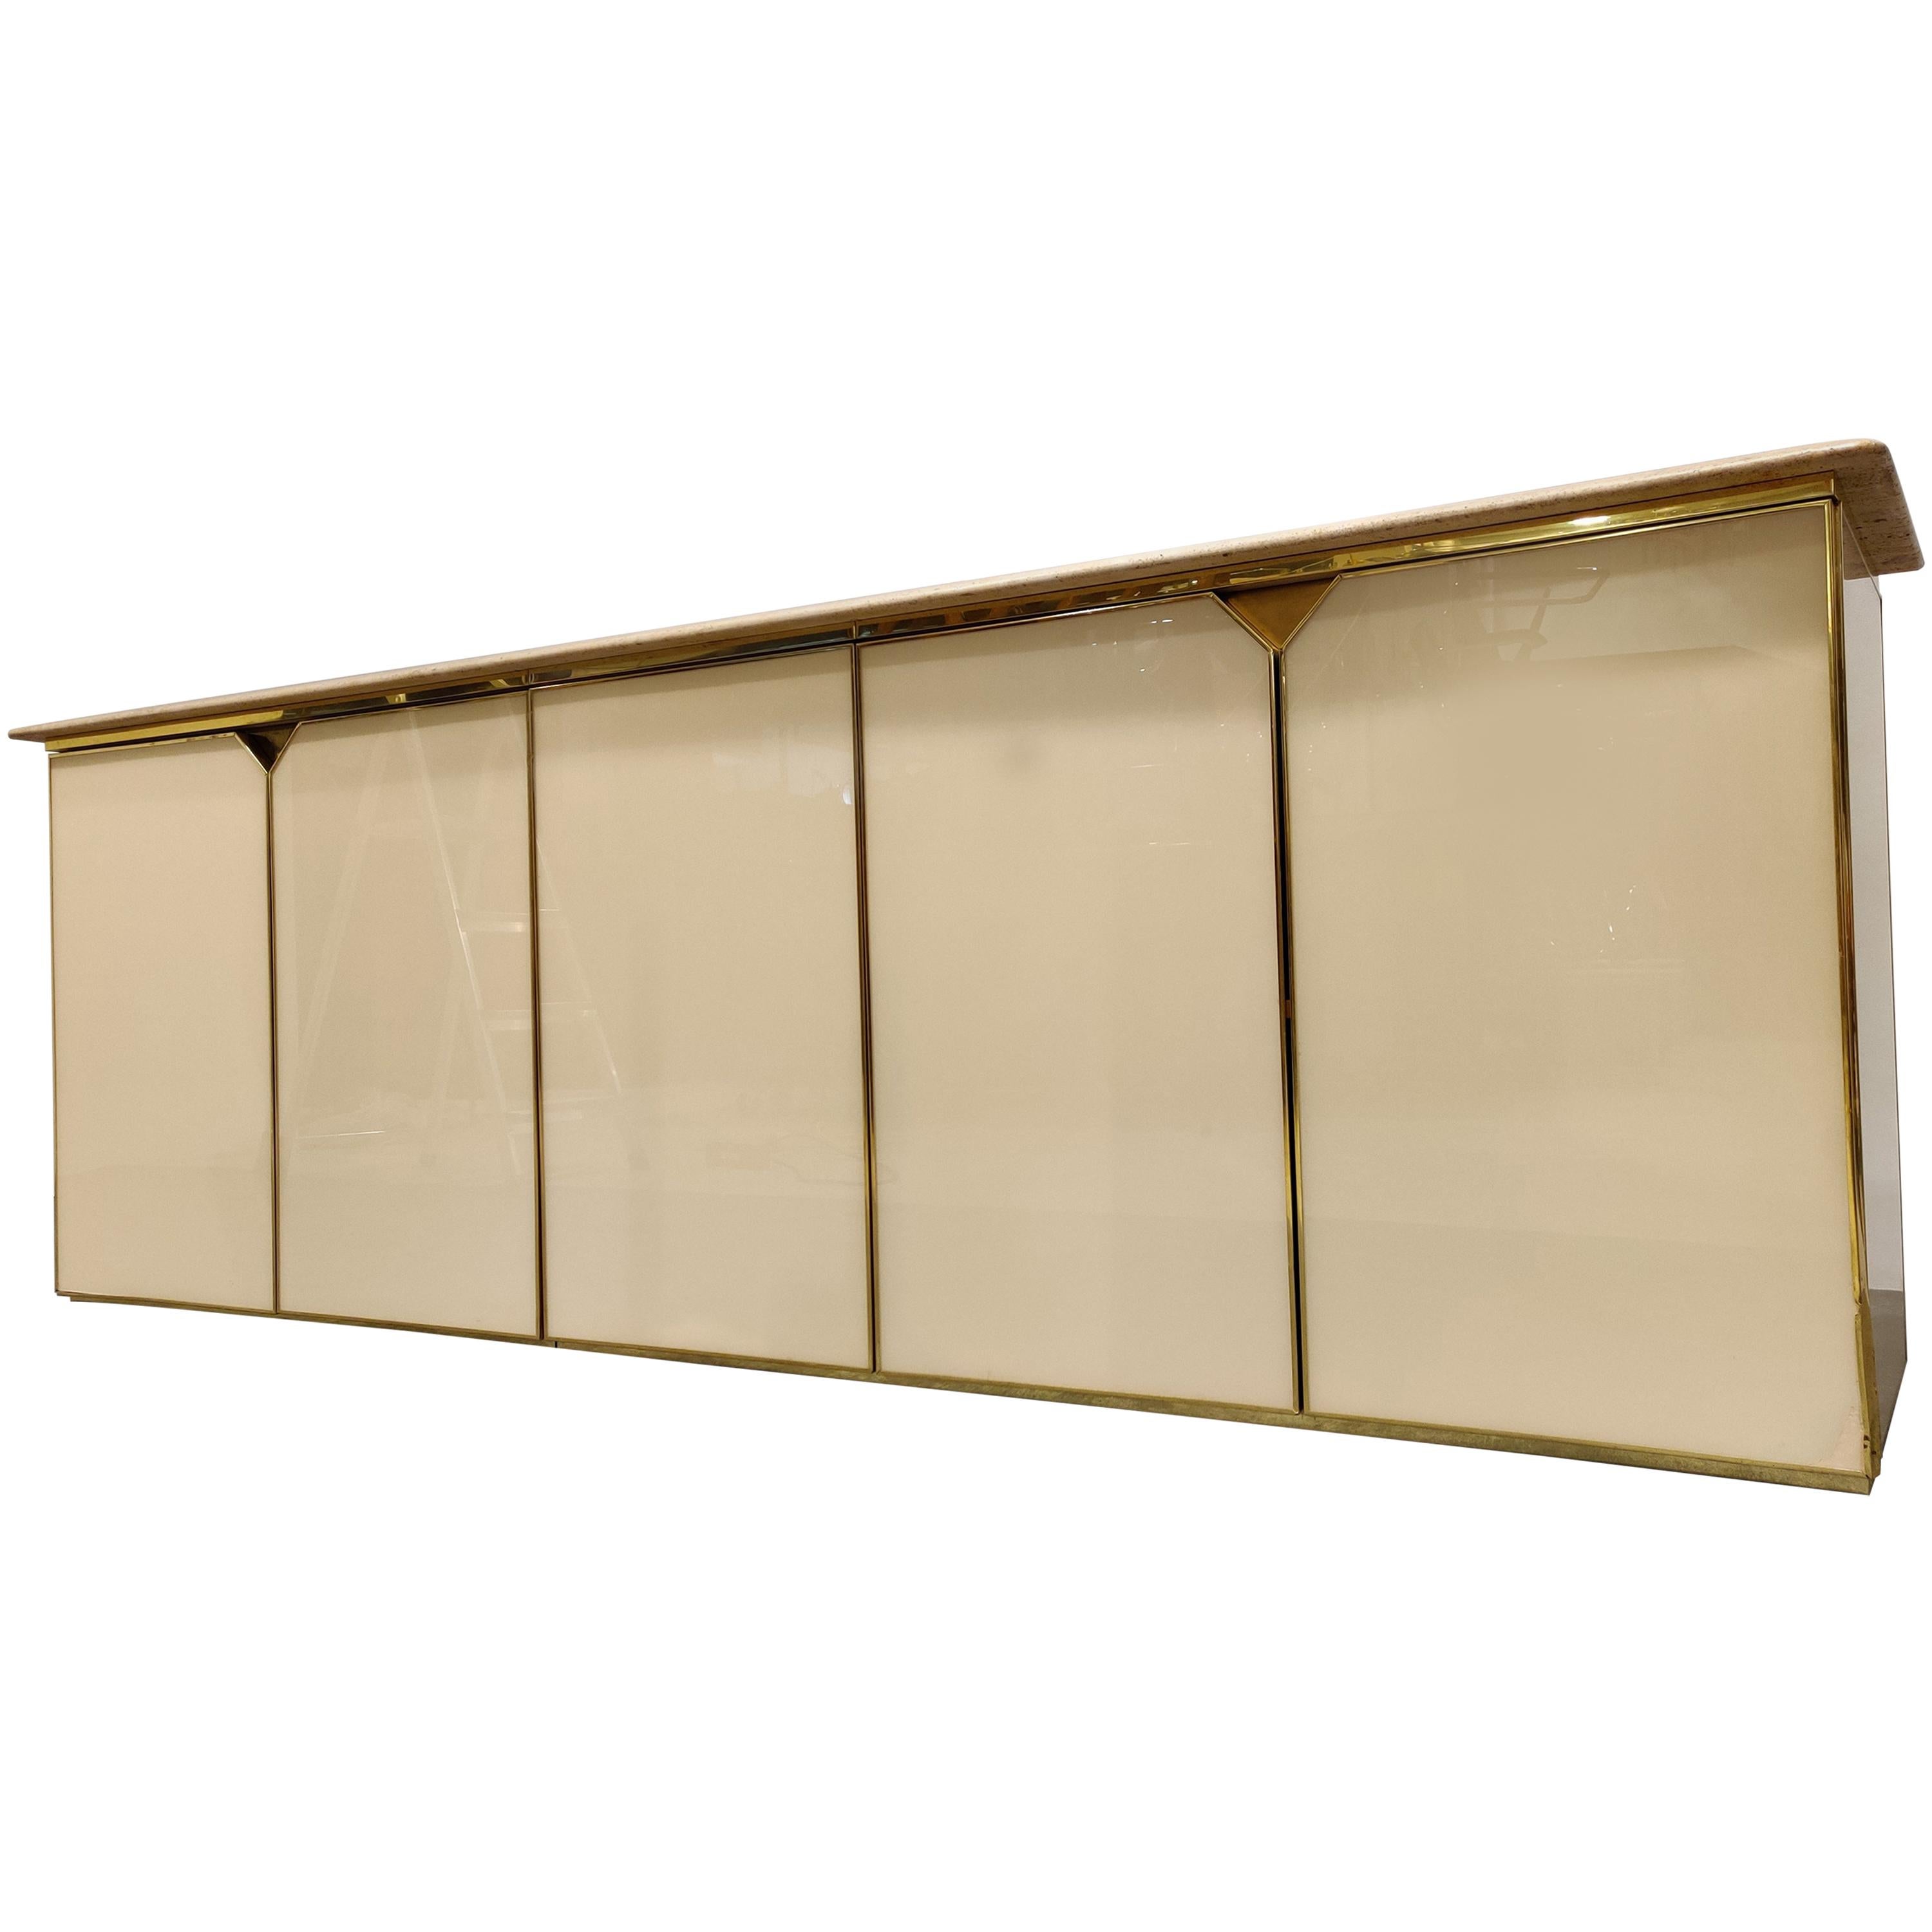 Vintage Lacquered and Travertine Credenza, 1970s